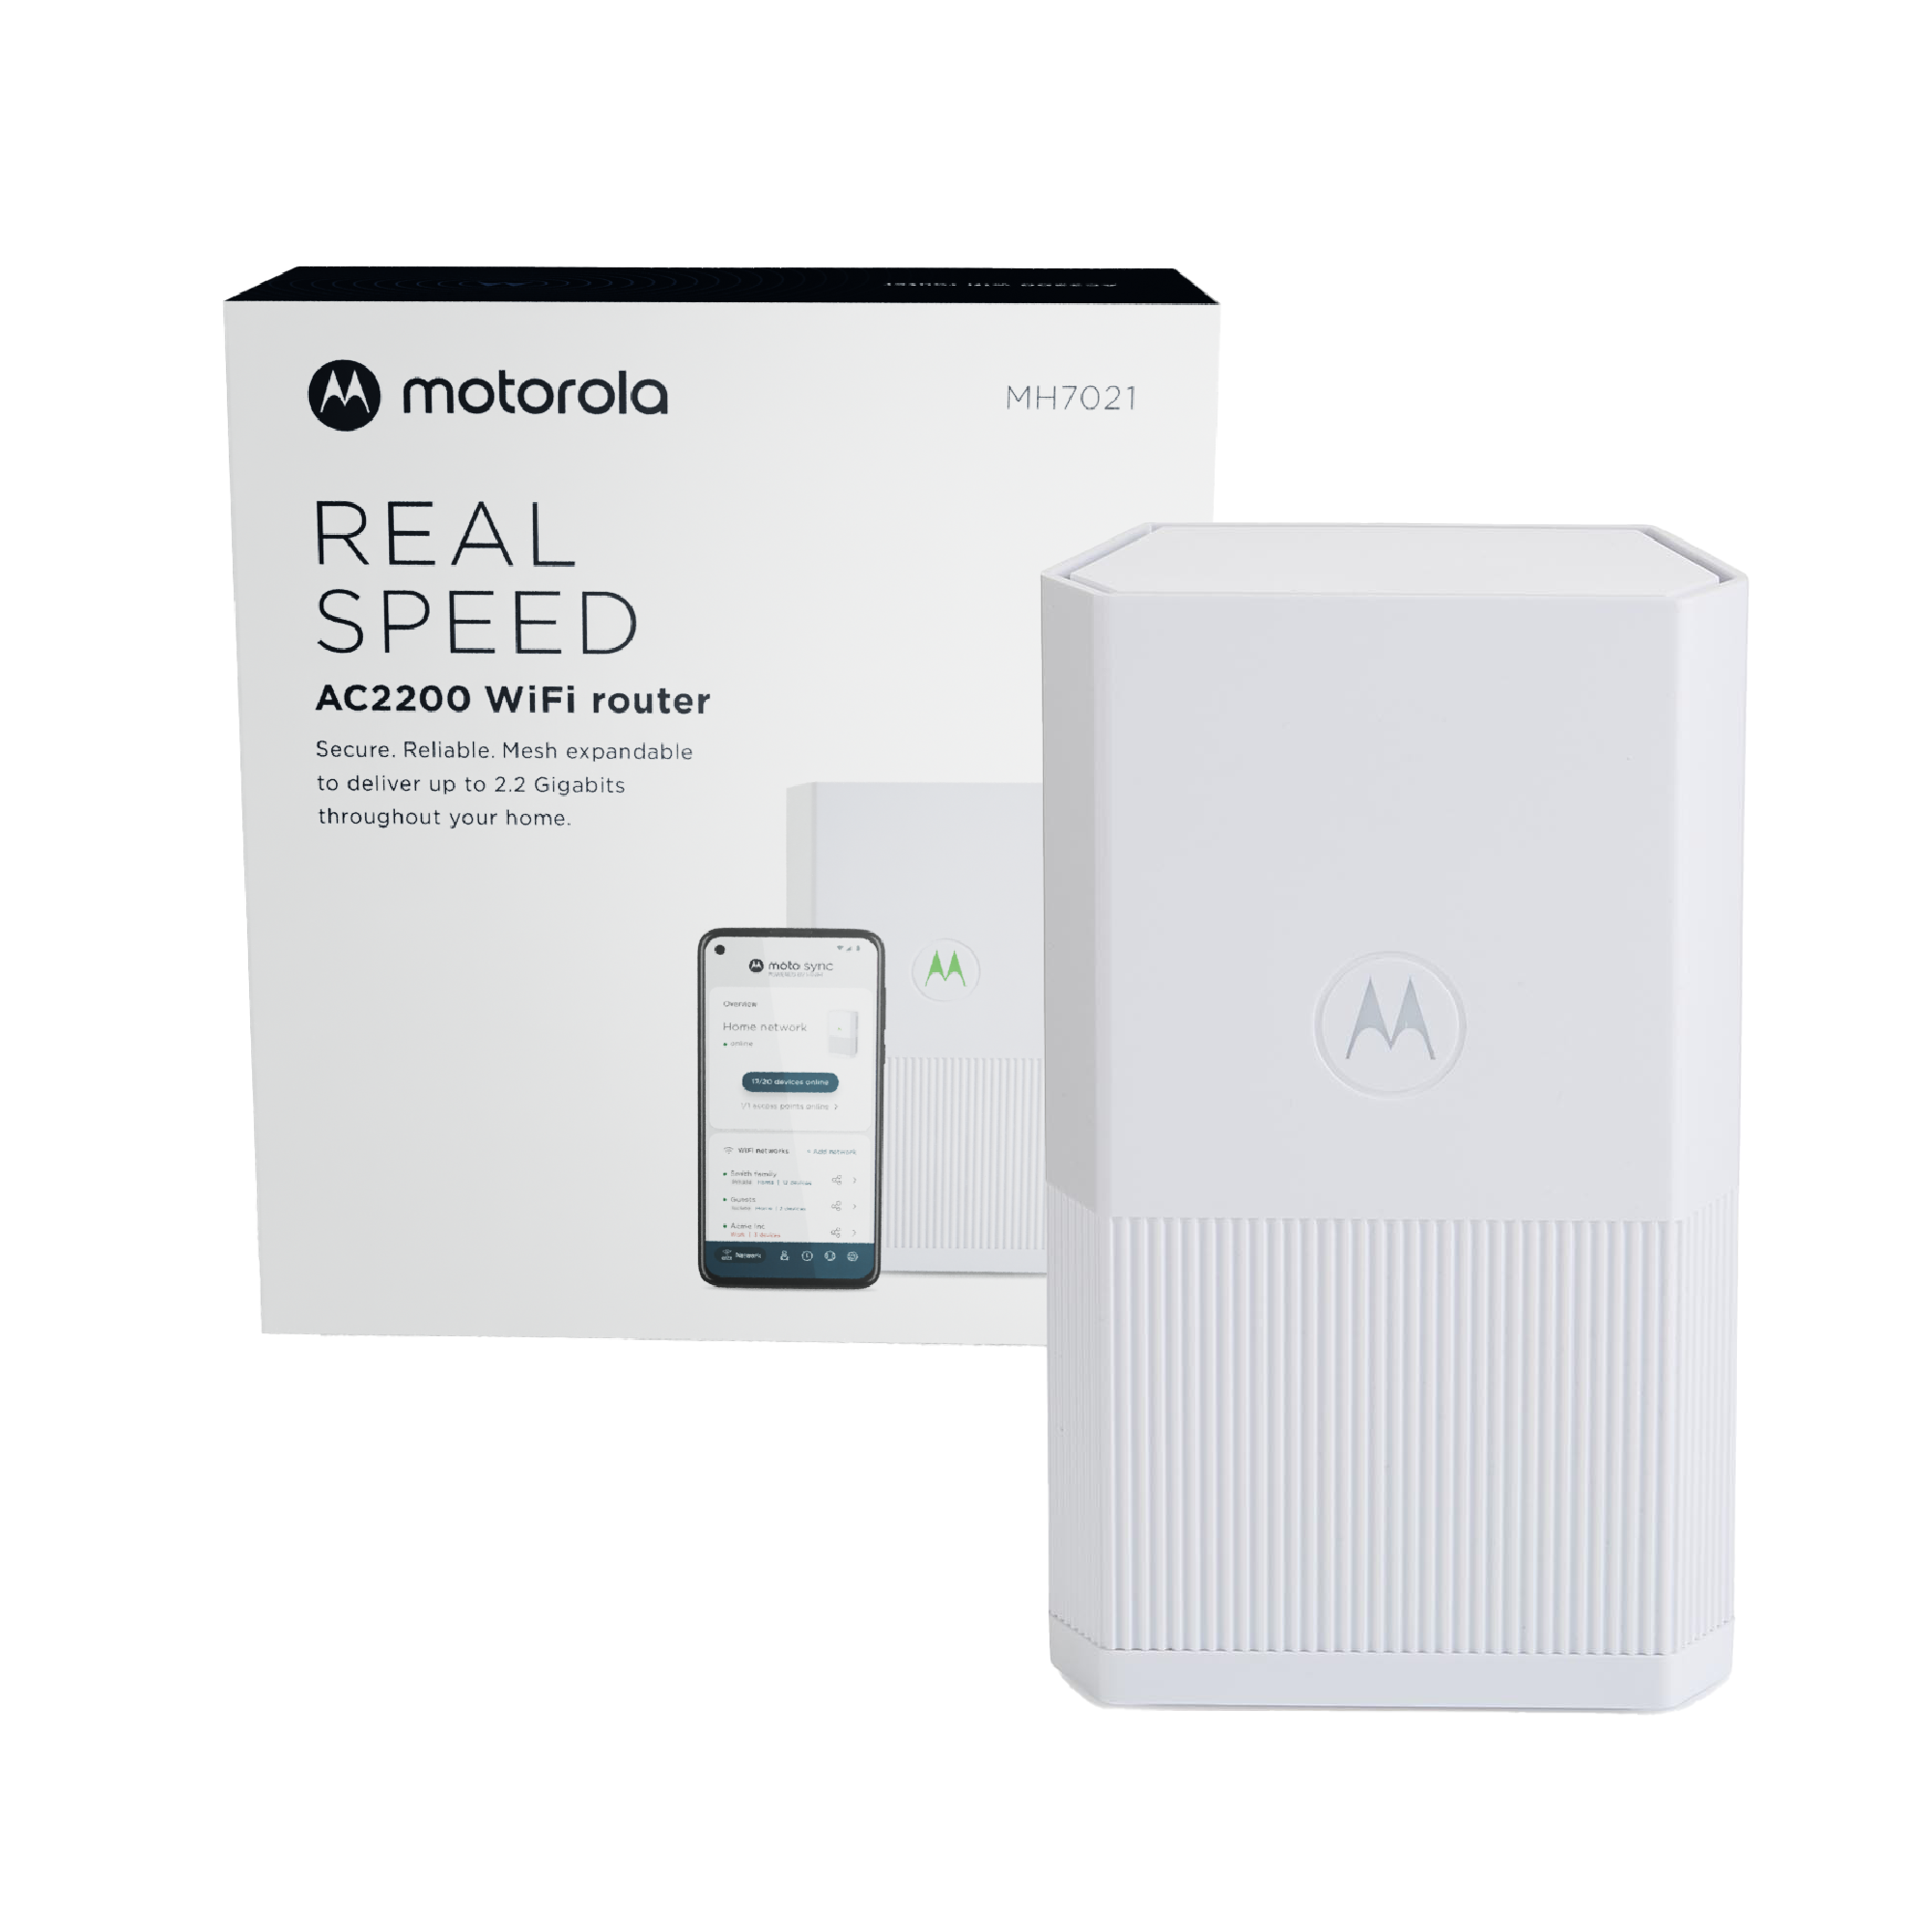 Motorola Gigabit Smart Home WiFi Router Coverage up to 2000 sq ft | WiFi Mesh System Compatible | AC2200 WiFi | Fast Setup, Security, Adblocking + Parental Controls with The Motosync app - image 1 of 7